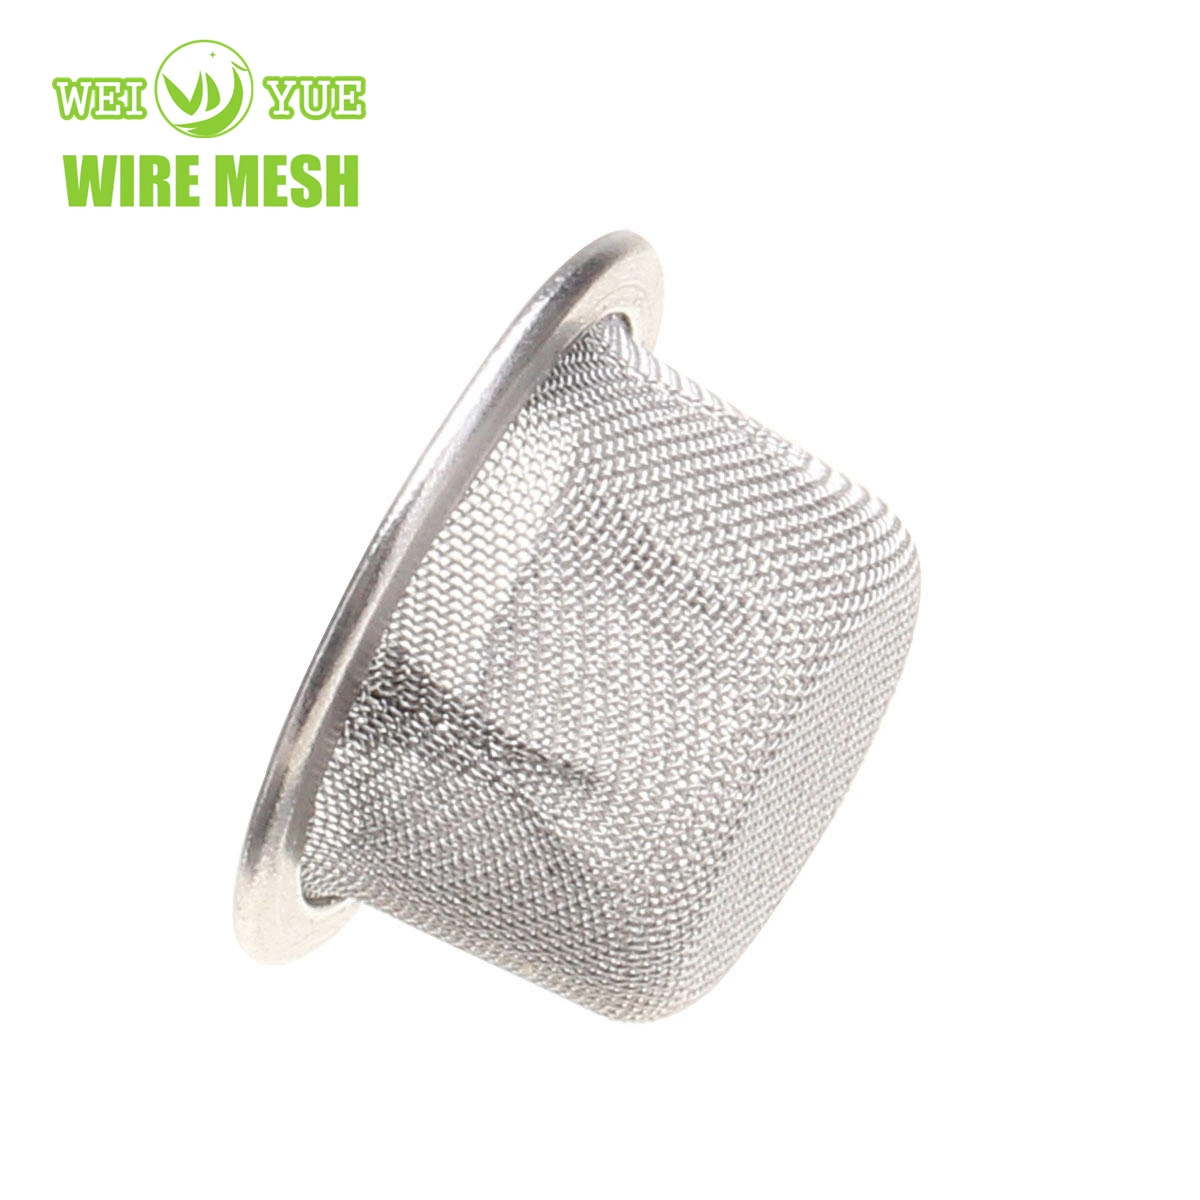 Stainless Steel Wire Mesh Filter Basket for Electrolux Dissolution